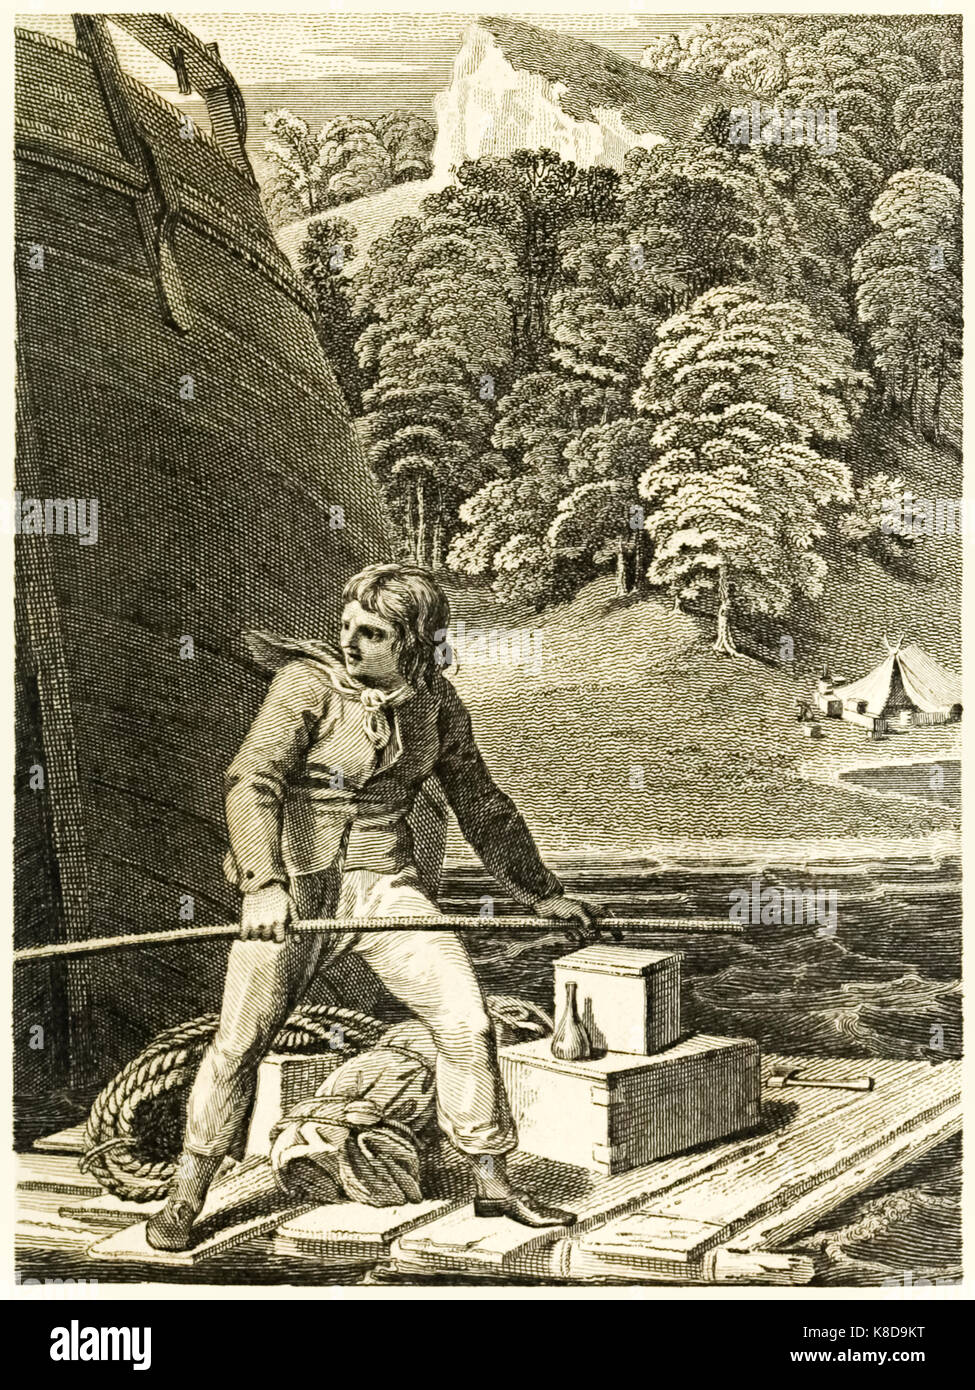 ‘Robinson Crusoe upon his raft’ from “The Life and Strange Surprising Adventures of Robinson Crusoe, or York, Mariner” by Daniel Defoe (1660-1731). Illustration by Thomas Stothard (1755-1834) engraving by Thomas Medland (1765-1833). See more information below Stock Photo